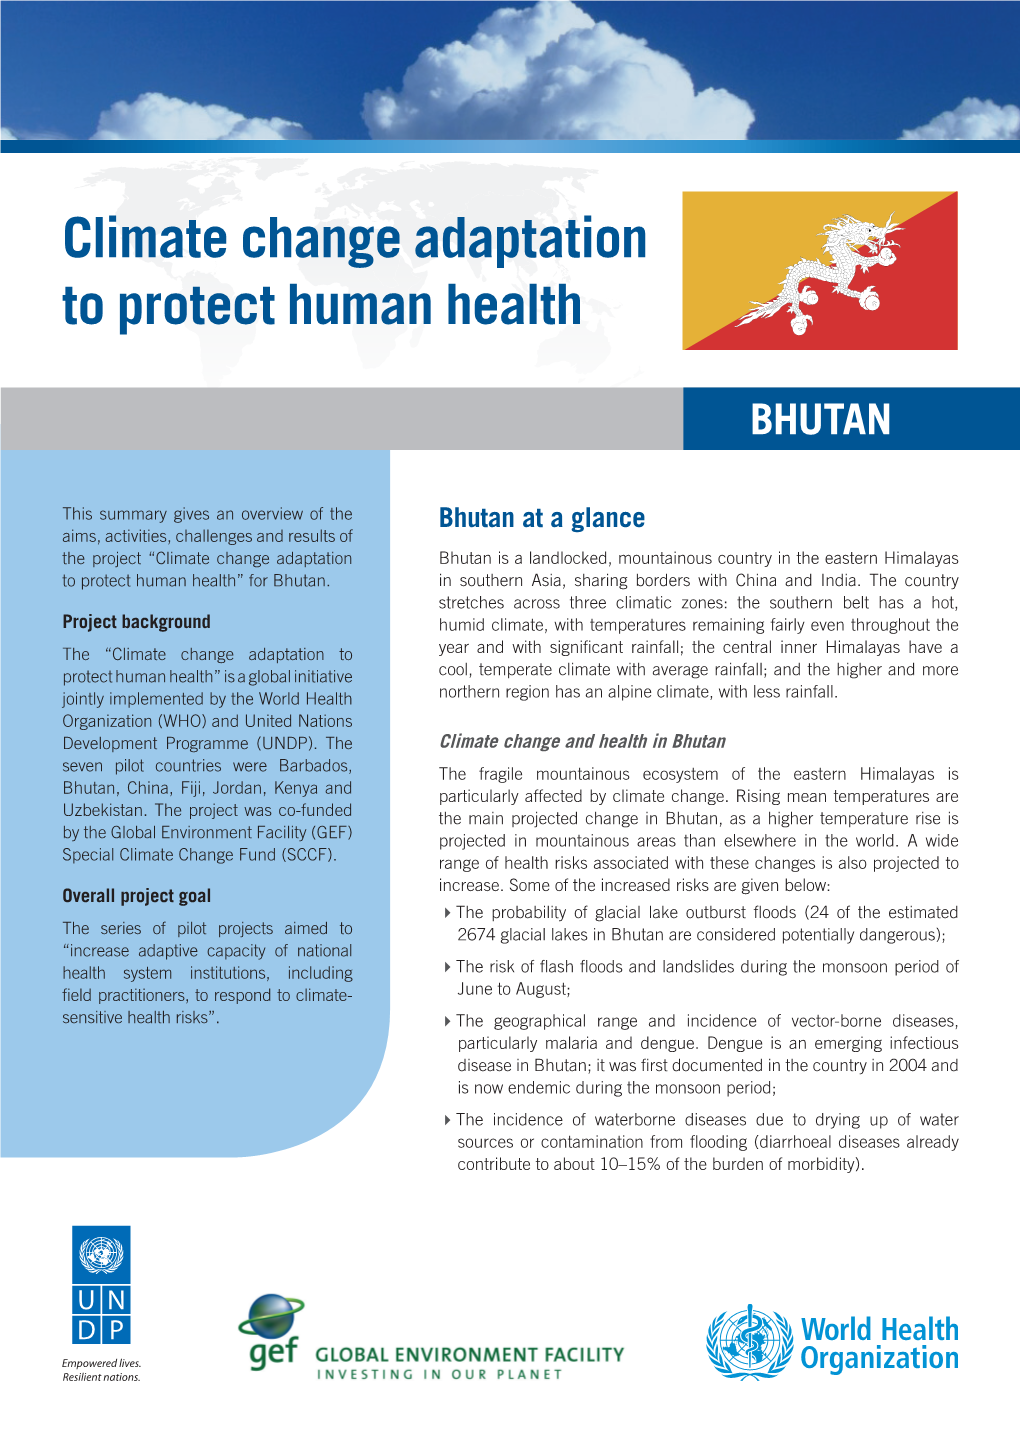 Climate Change Adaptation to Protect Human Health